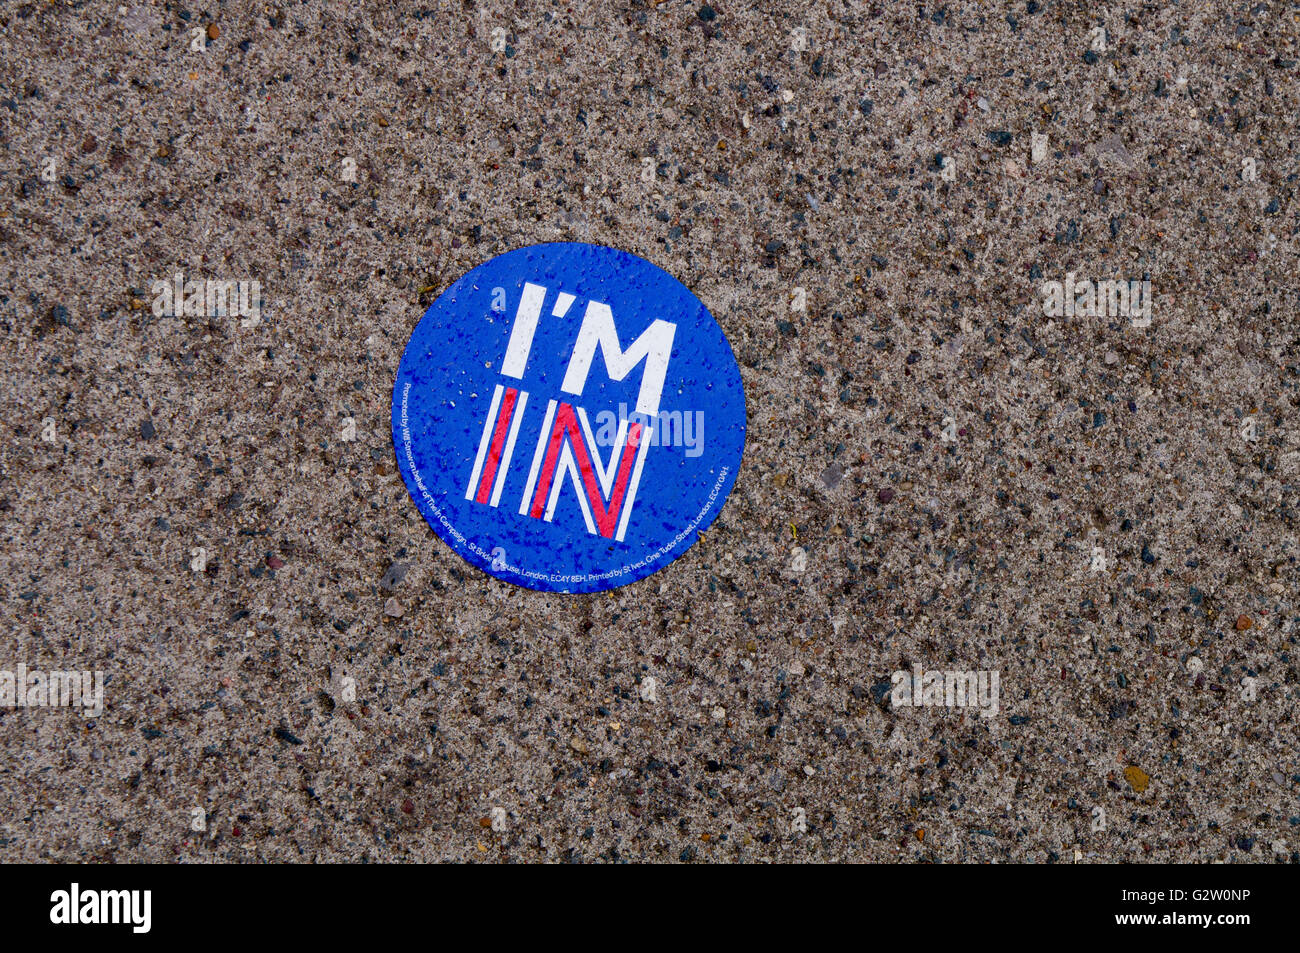 campaign against a UK Brexit, referendum, Vote Remain, I'M IN sticker Stock Photo